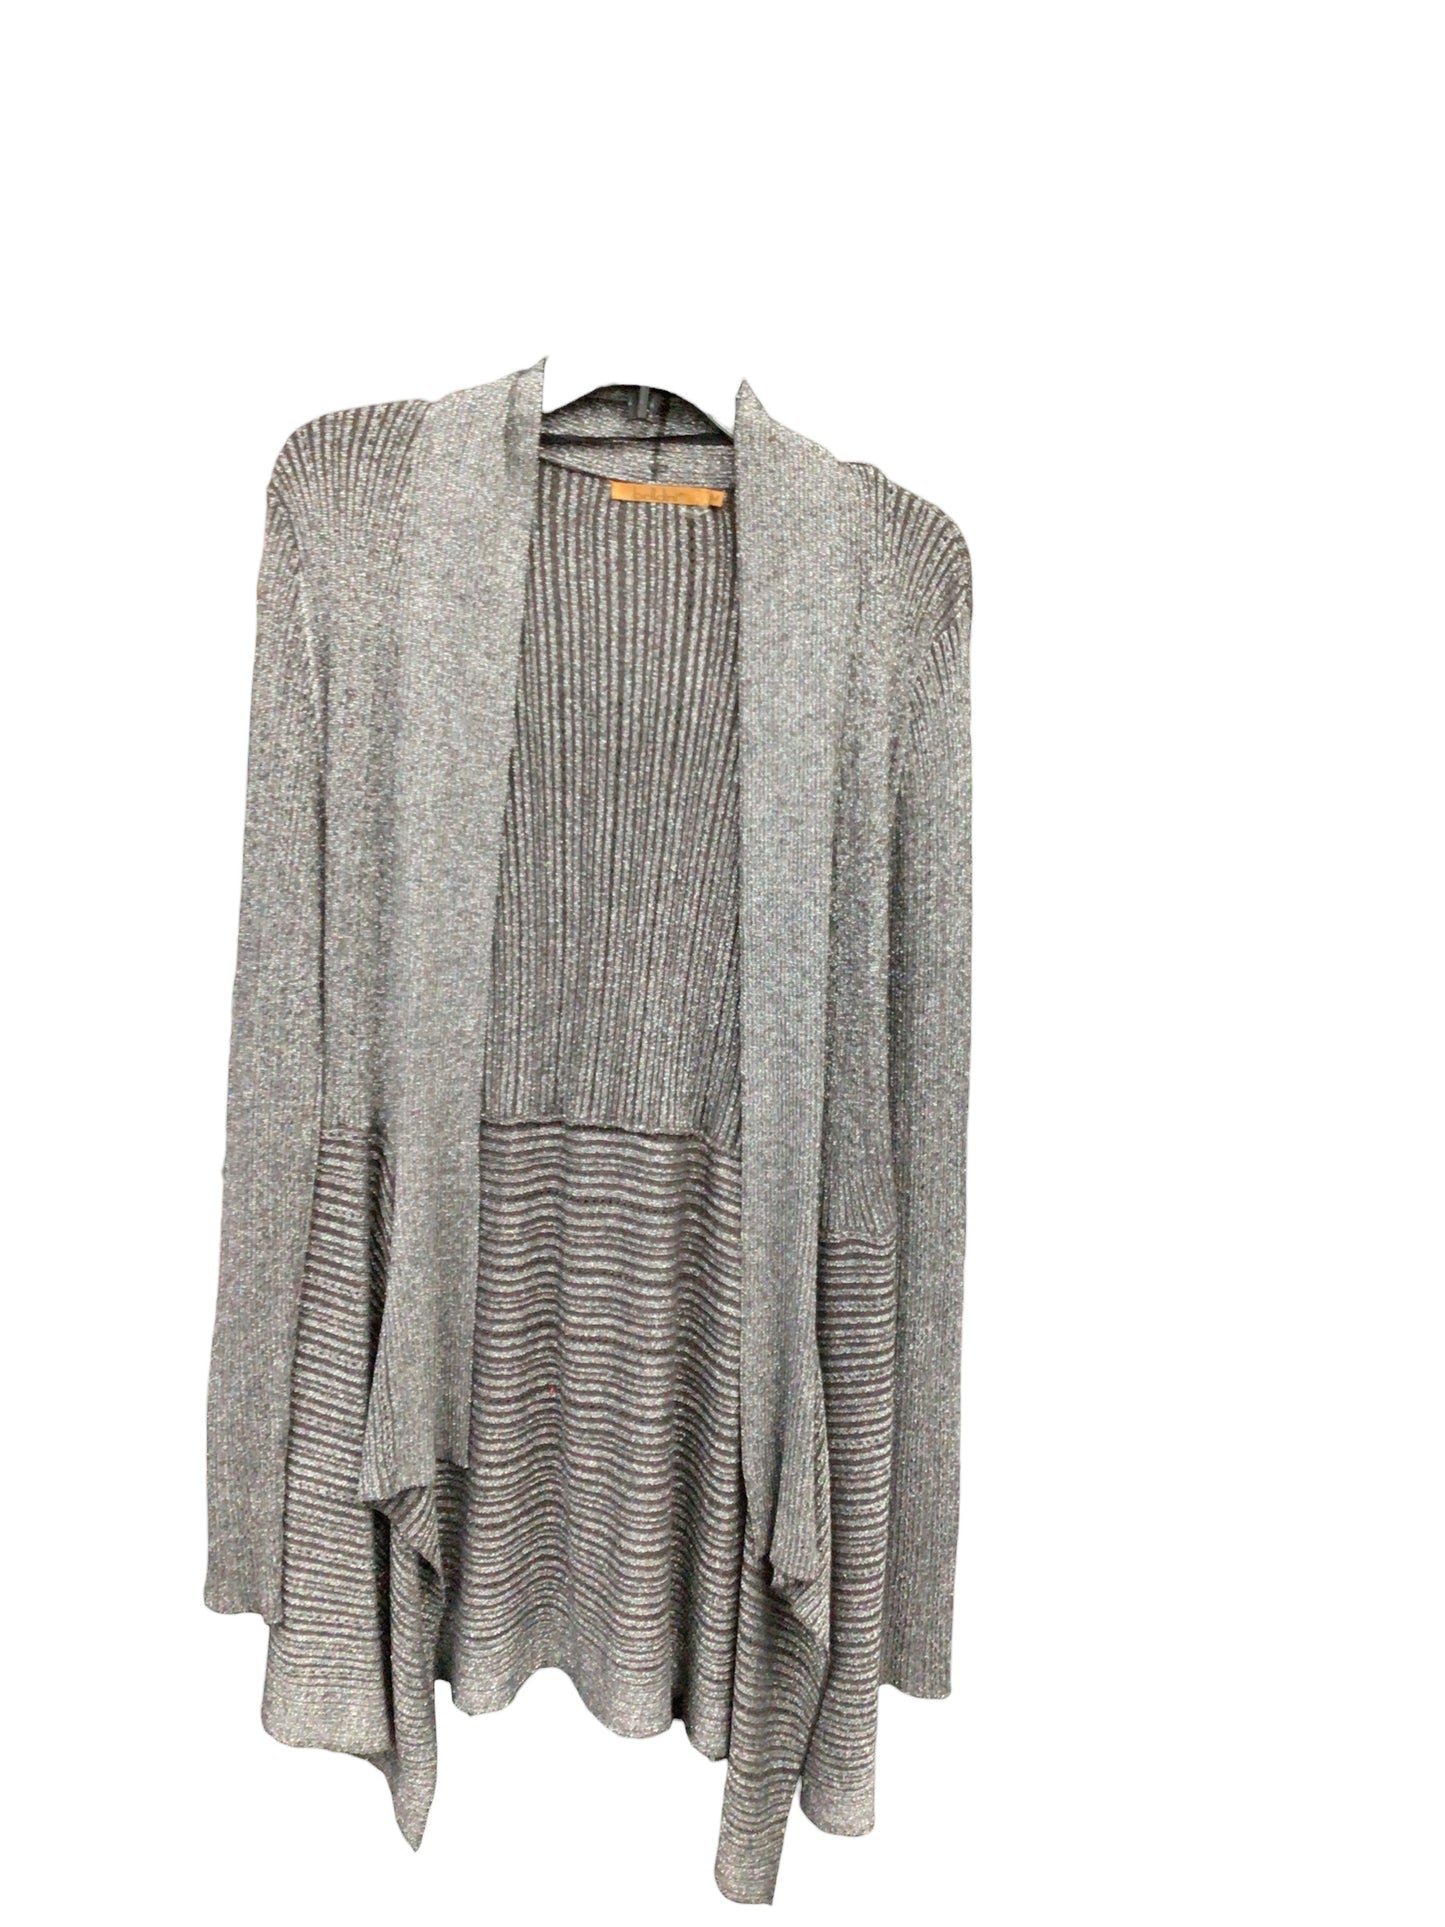 Cardigan By Belldini  Size: M